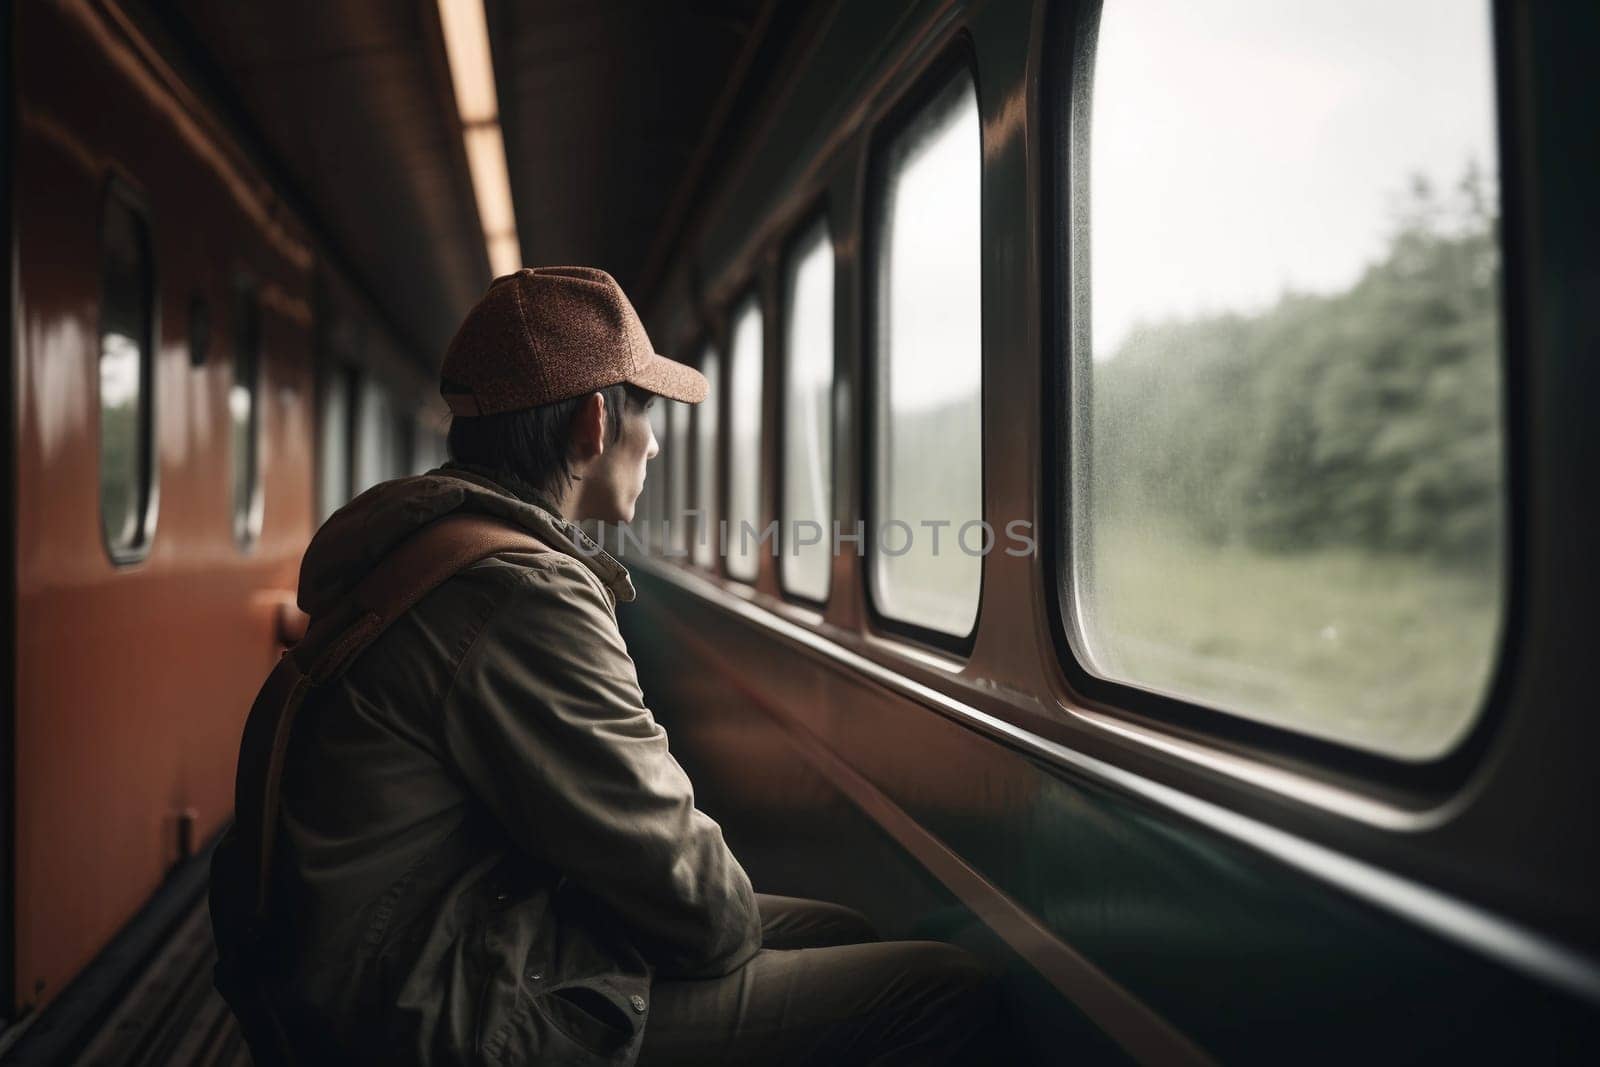 A man sits on a train looking out the window.